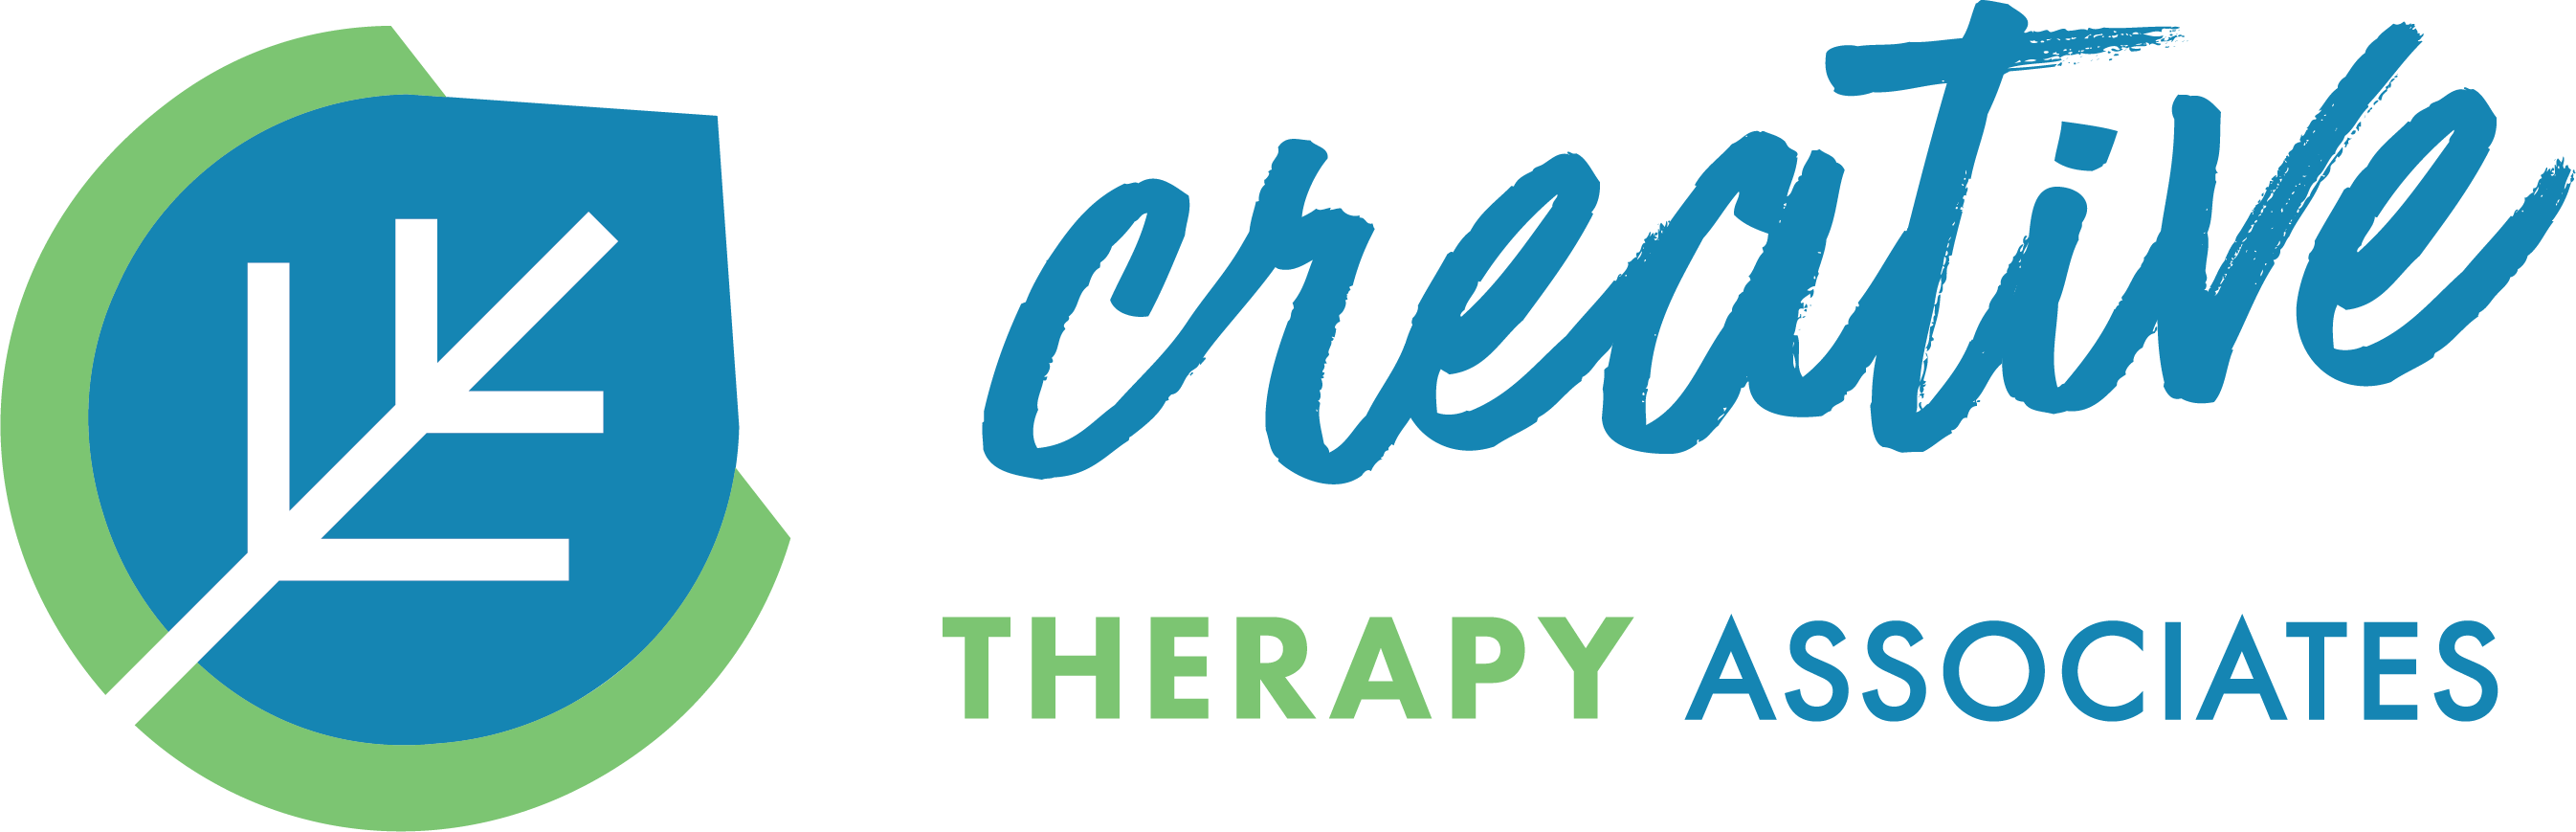 Creative Therapy Logo - Dentistry (2692x869)